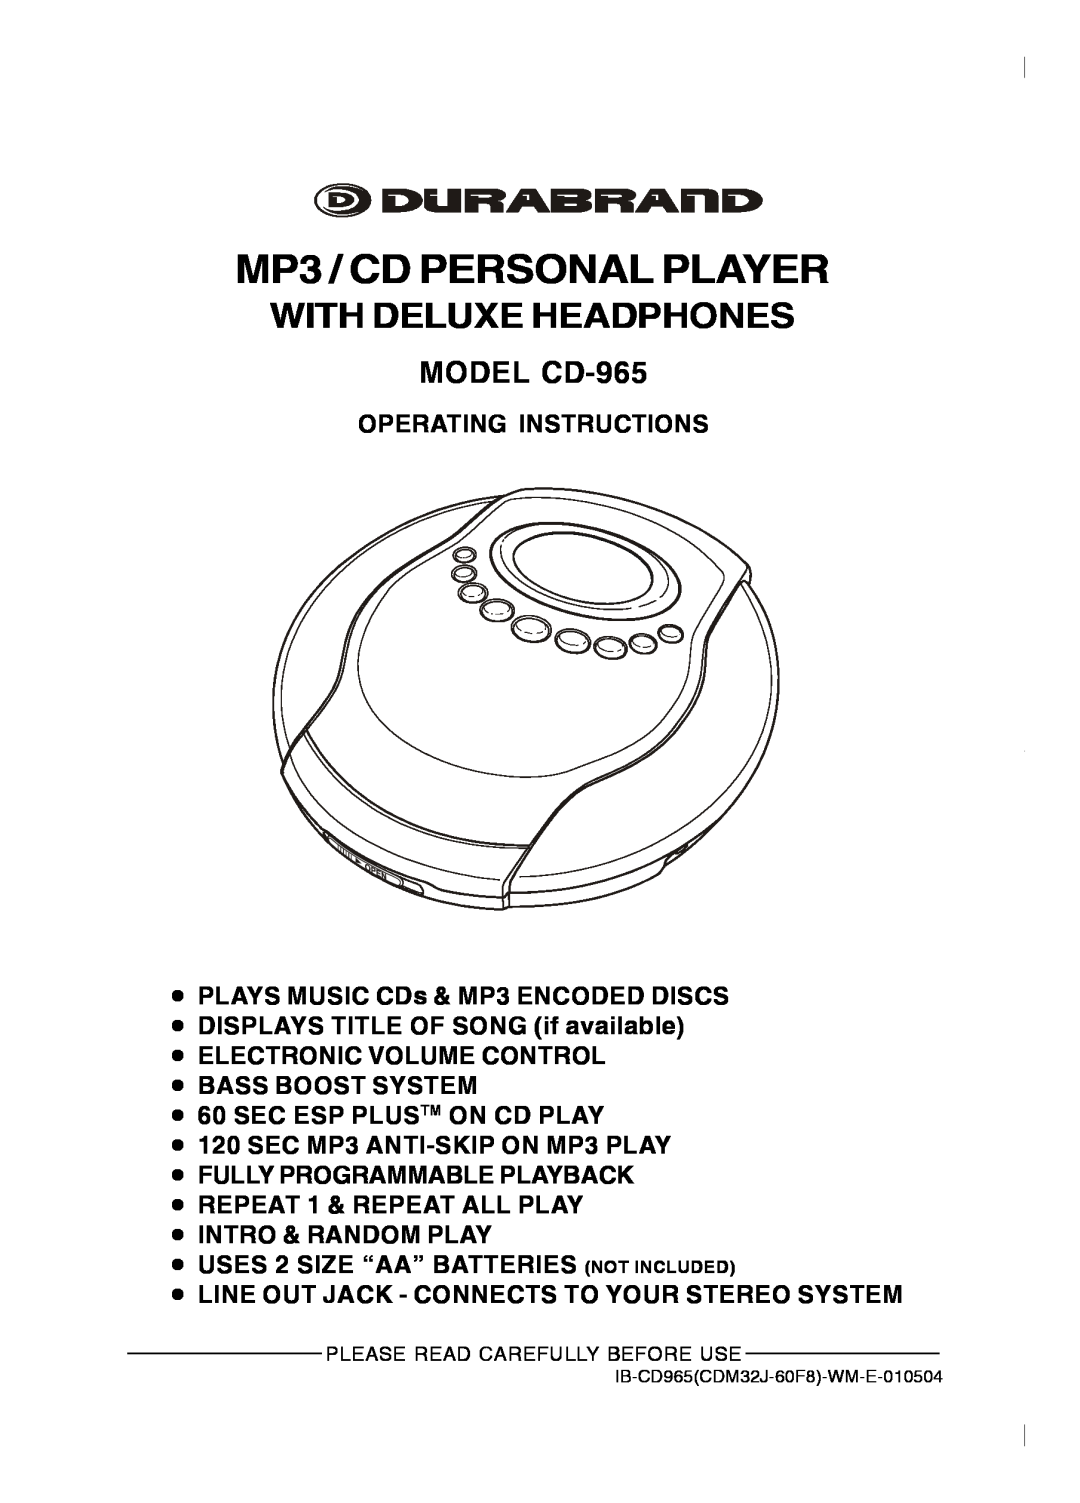 Lenoxx Electronics operating instructions With Deluxe Headphones, MODEL CD-965, MP3 / CD PERSONAL PLAYER 